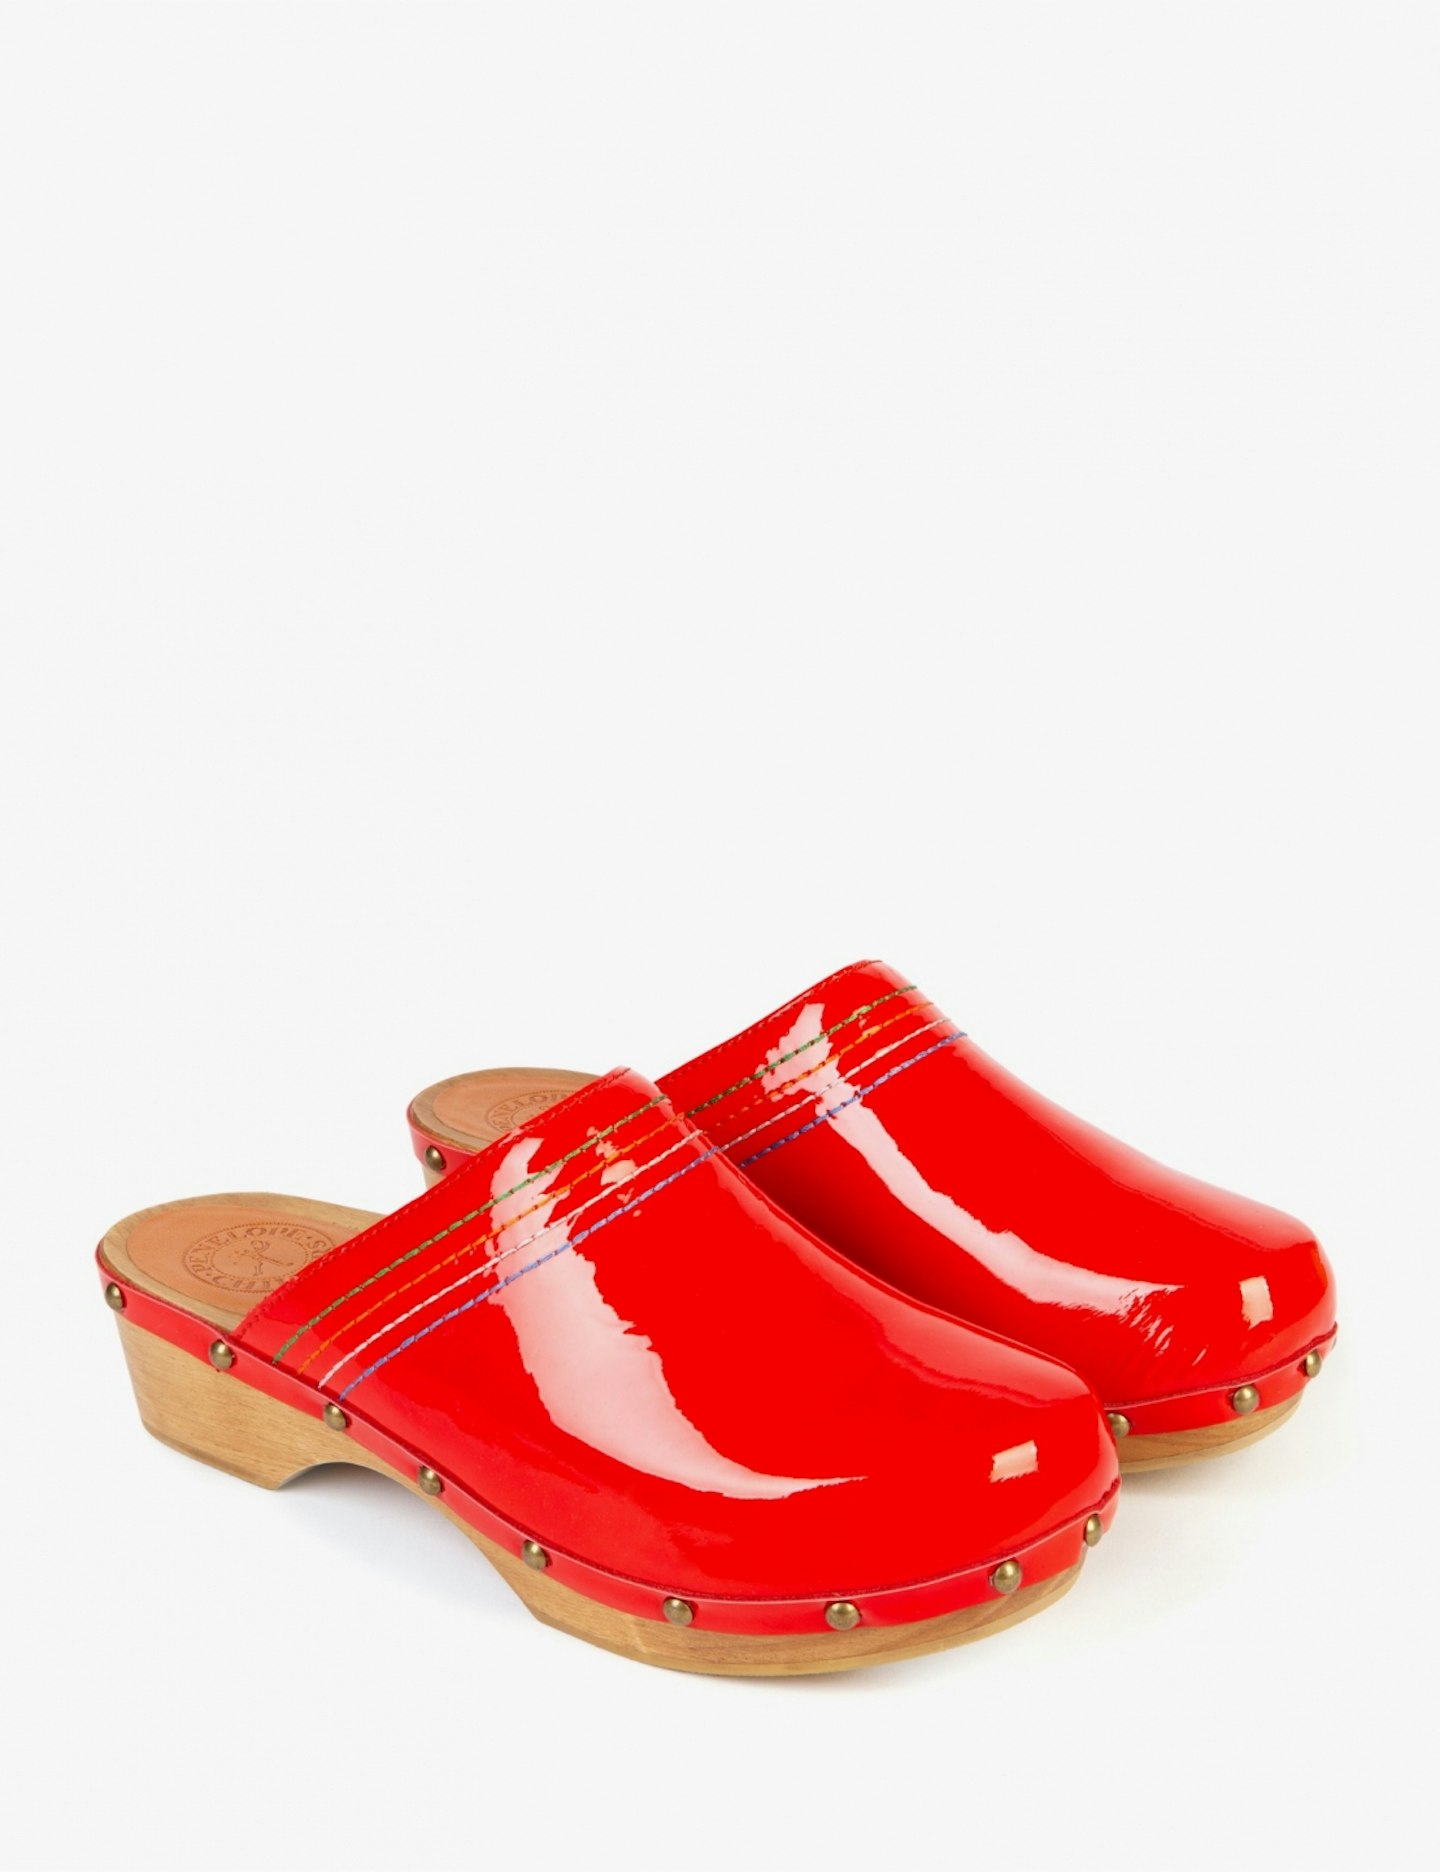 Penelope Chilvers, Low Patent Stitch Clog, £159